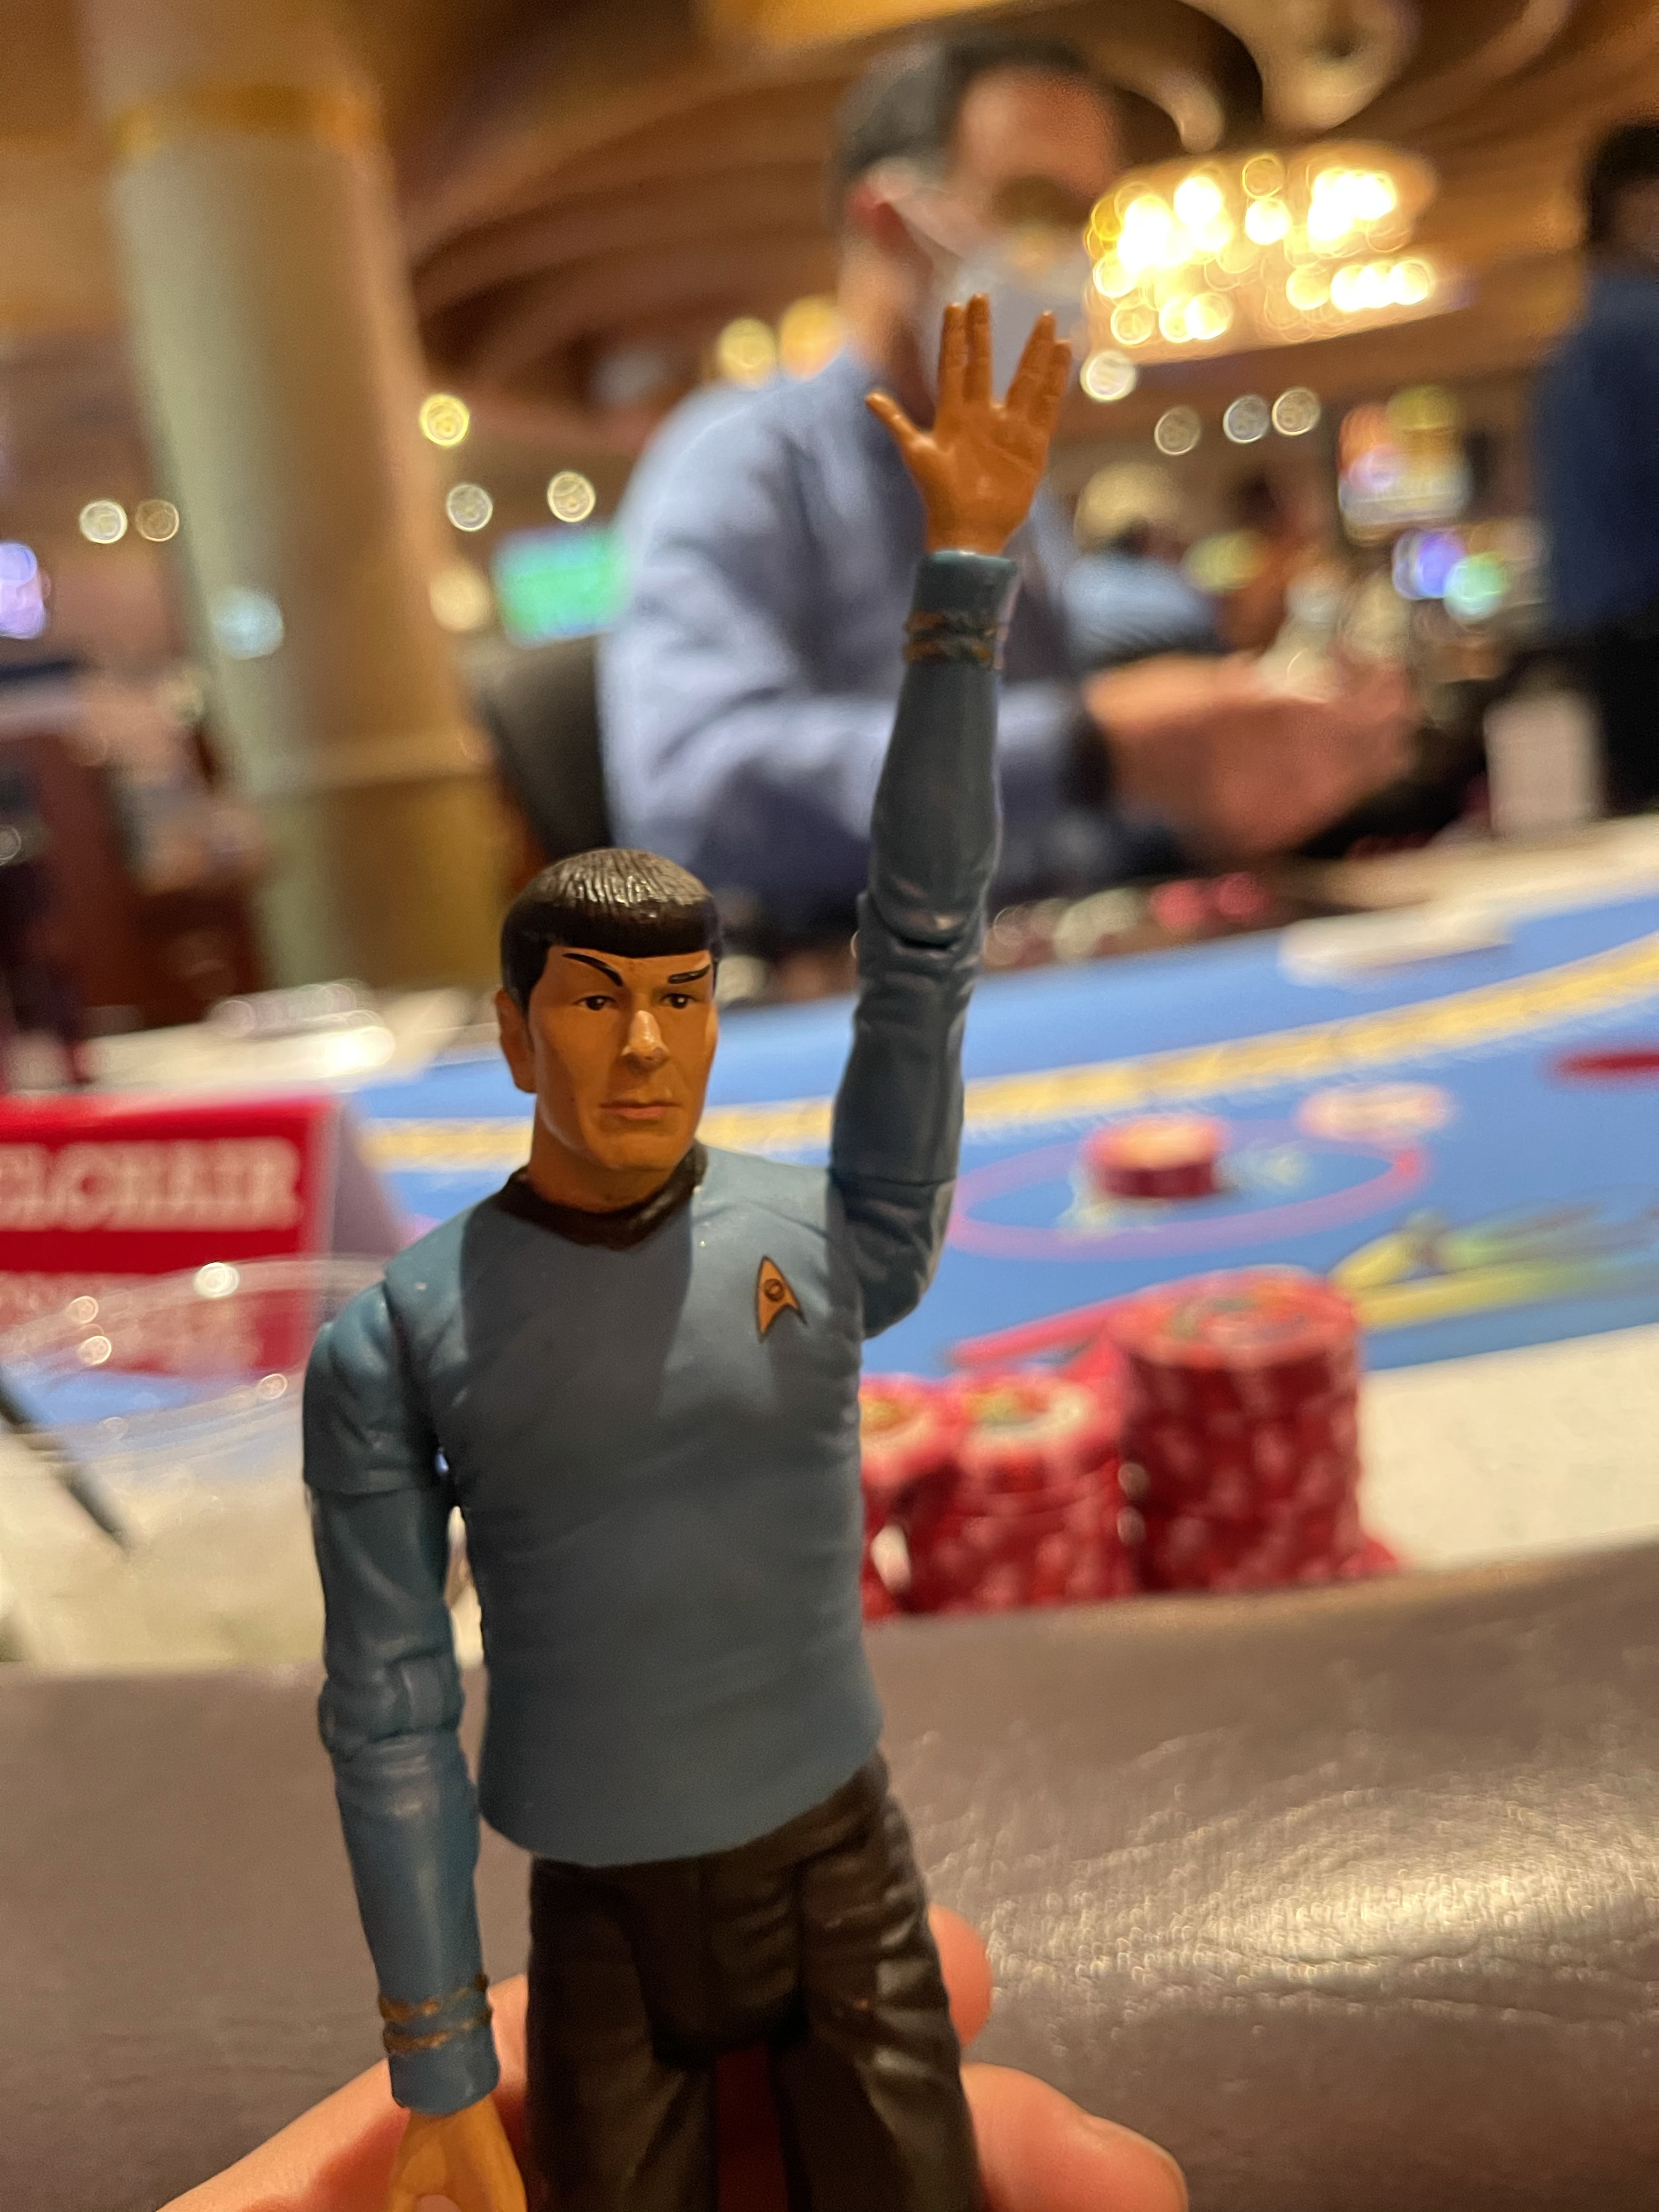 Spock Action Figure at Rio Casino Blackjack Table in Vegas for Trek Convention